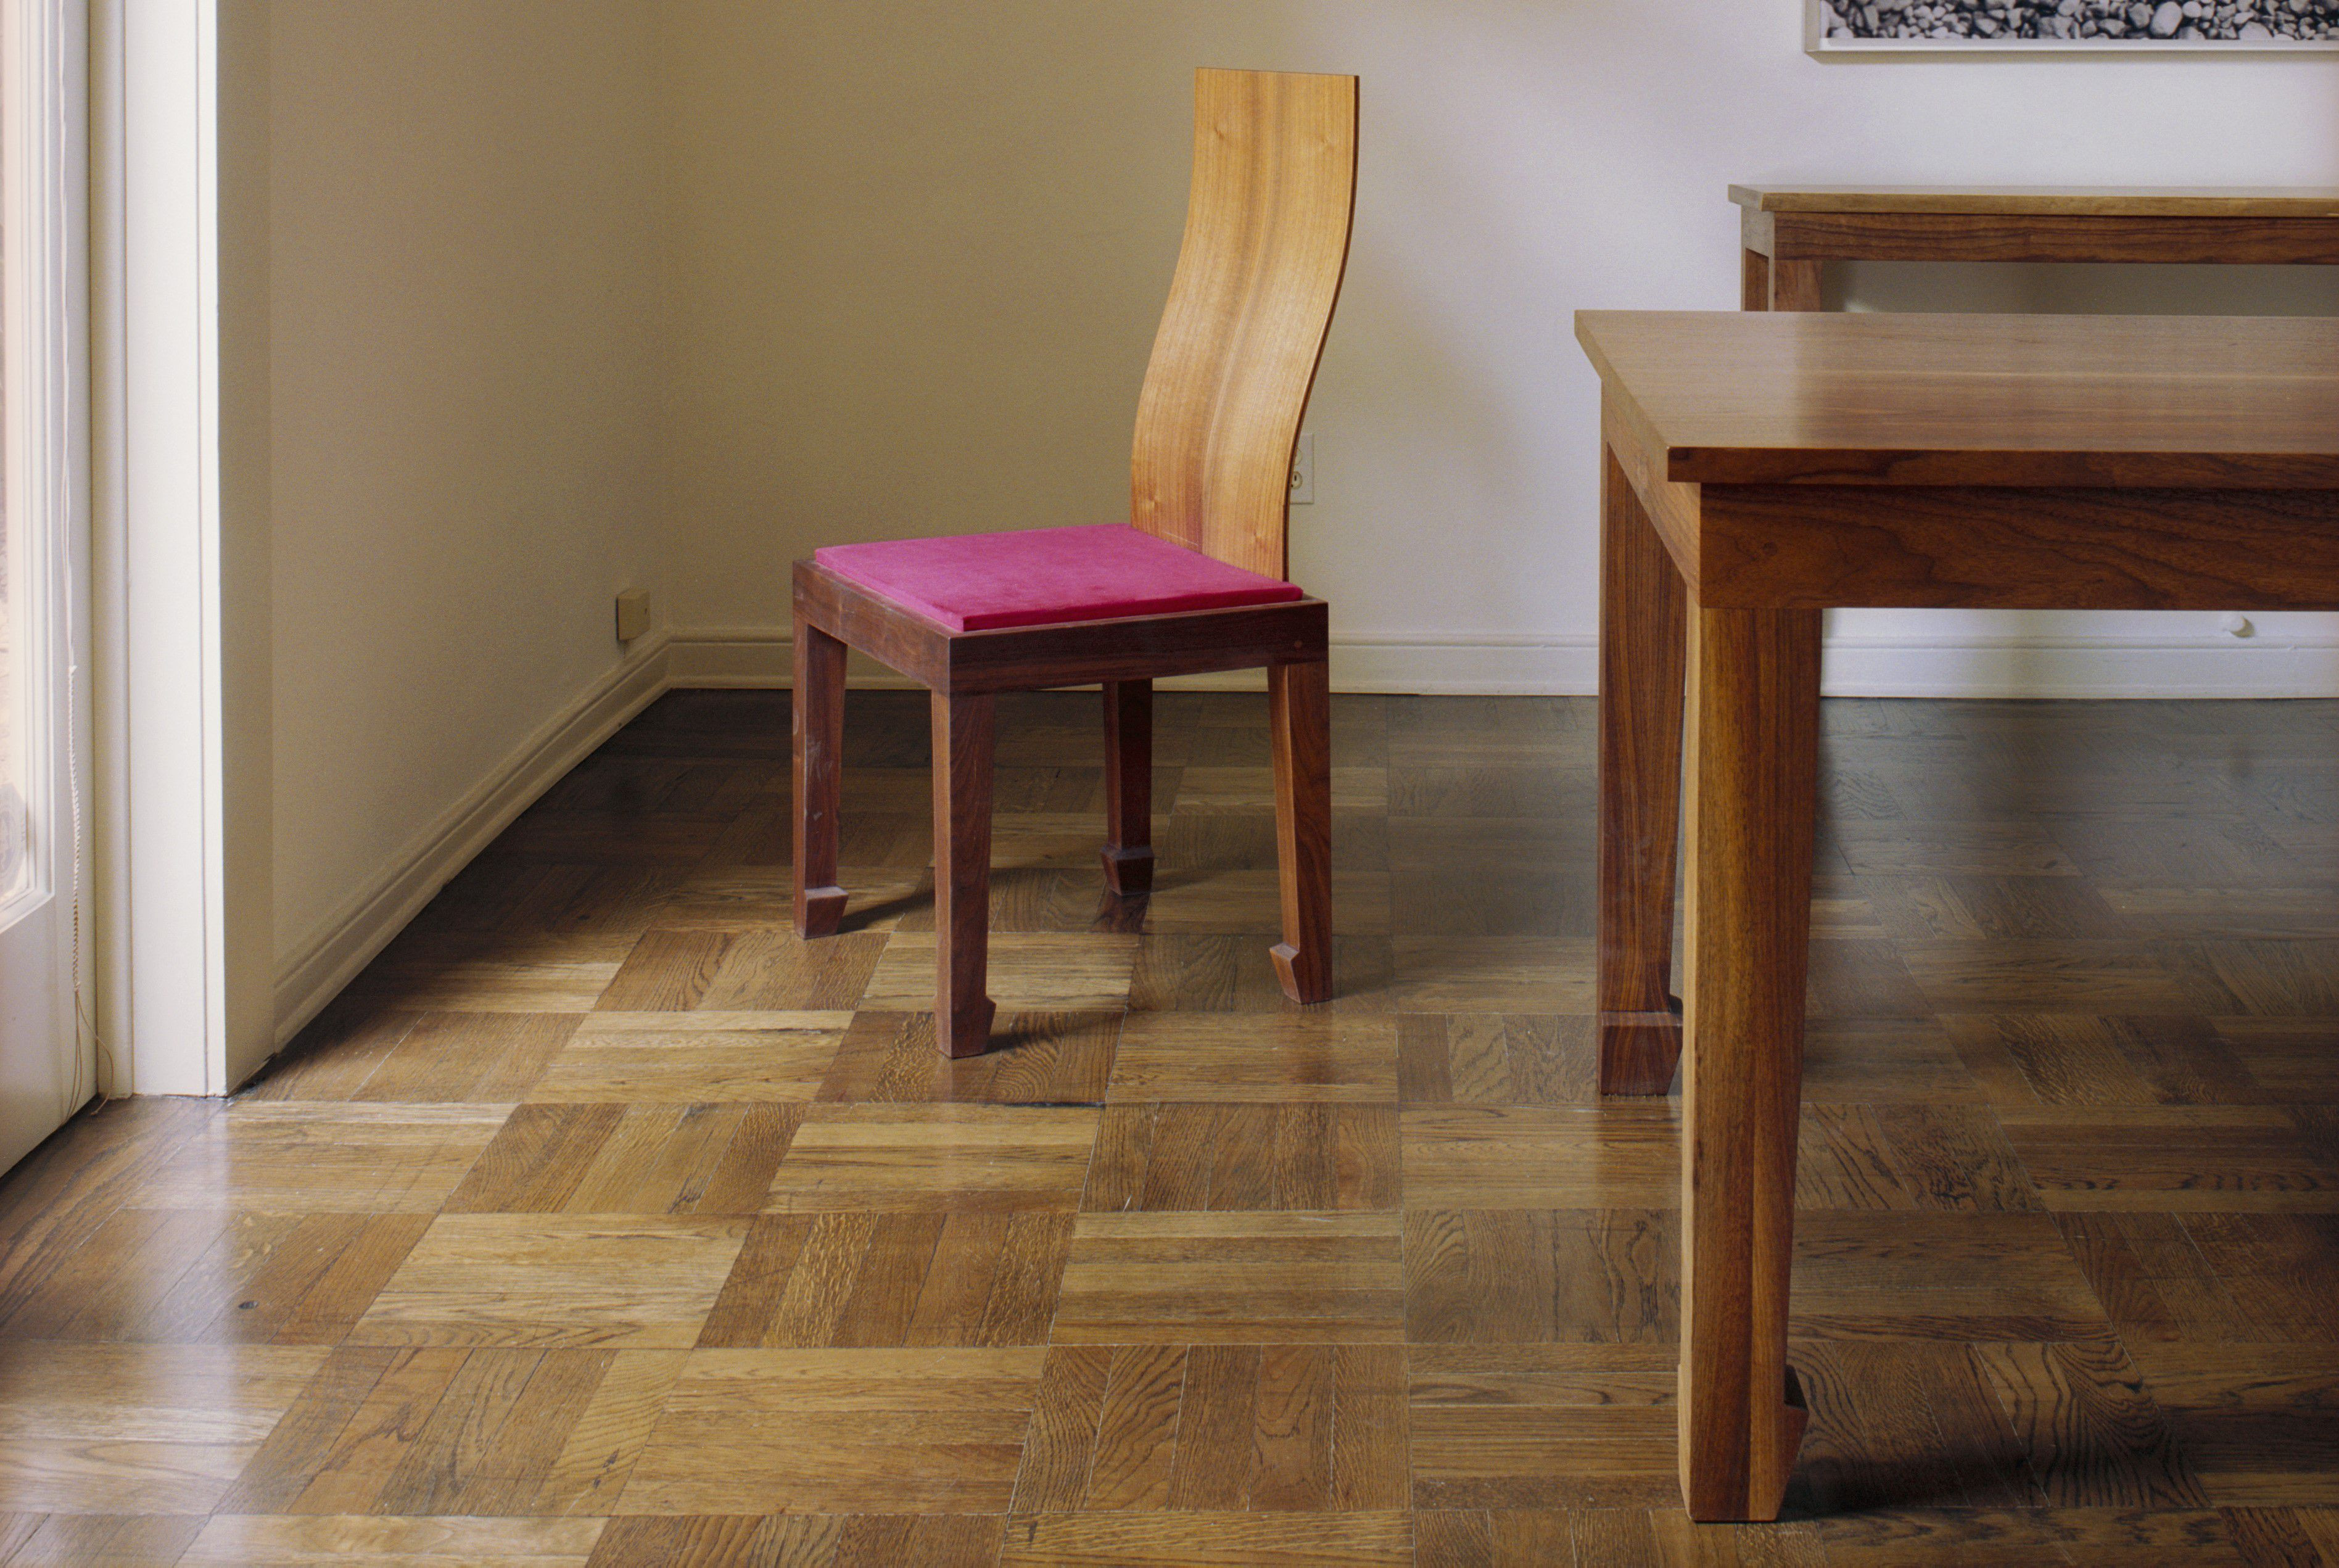 buy cheap hardwood flooring of wood parquet flooring poised for a resurgence intended for wood parquet flooring 529502452 576c78195f9b585875a1ac13